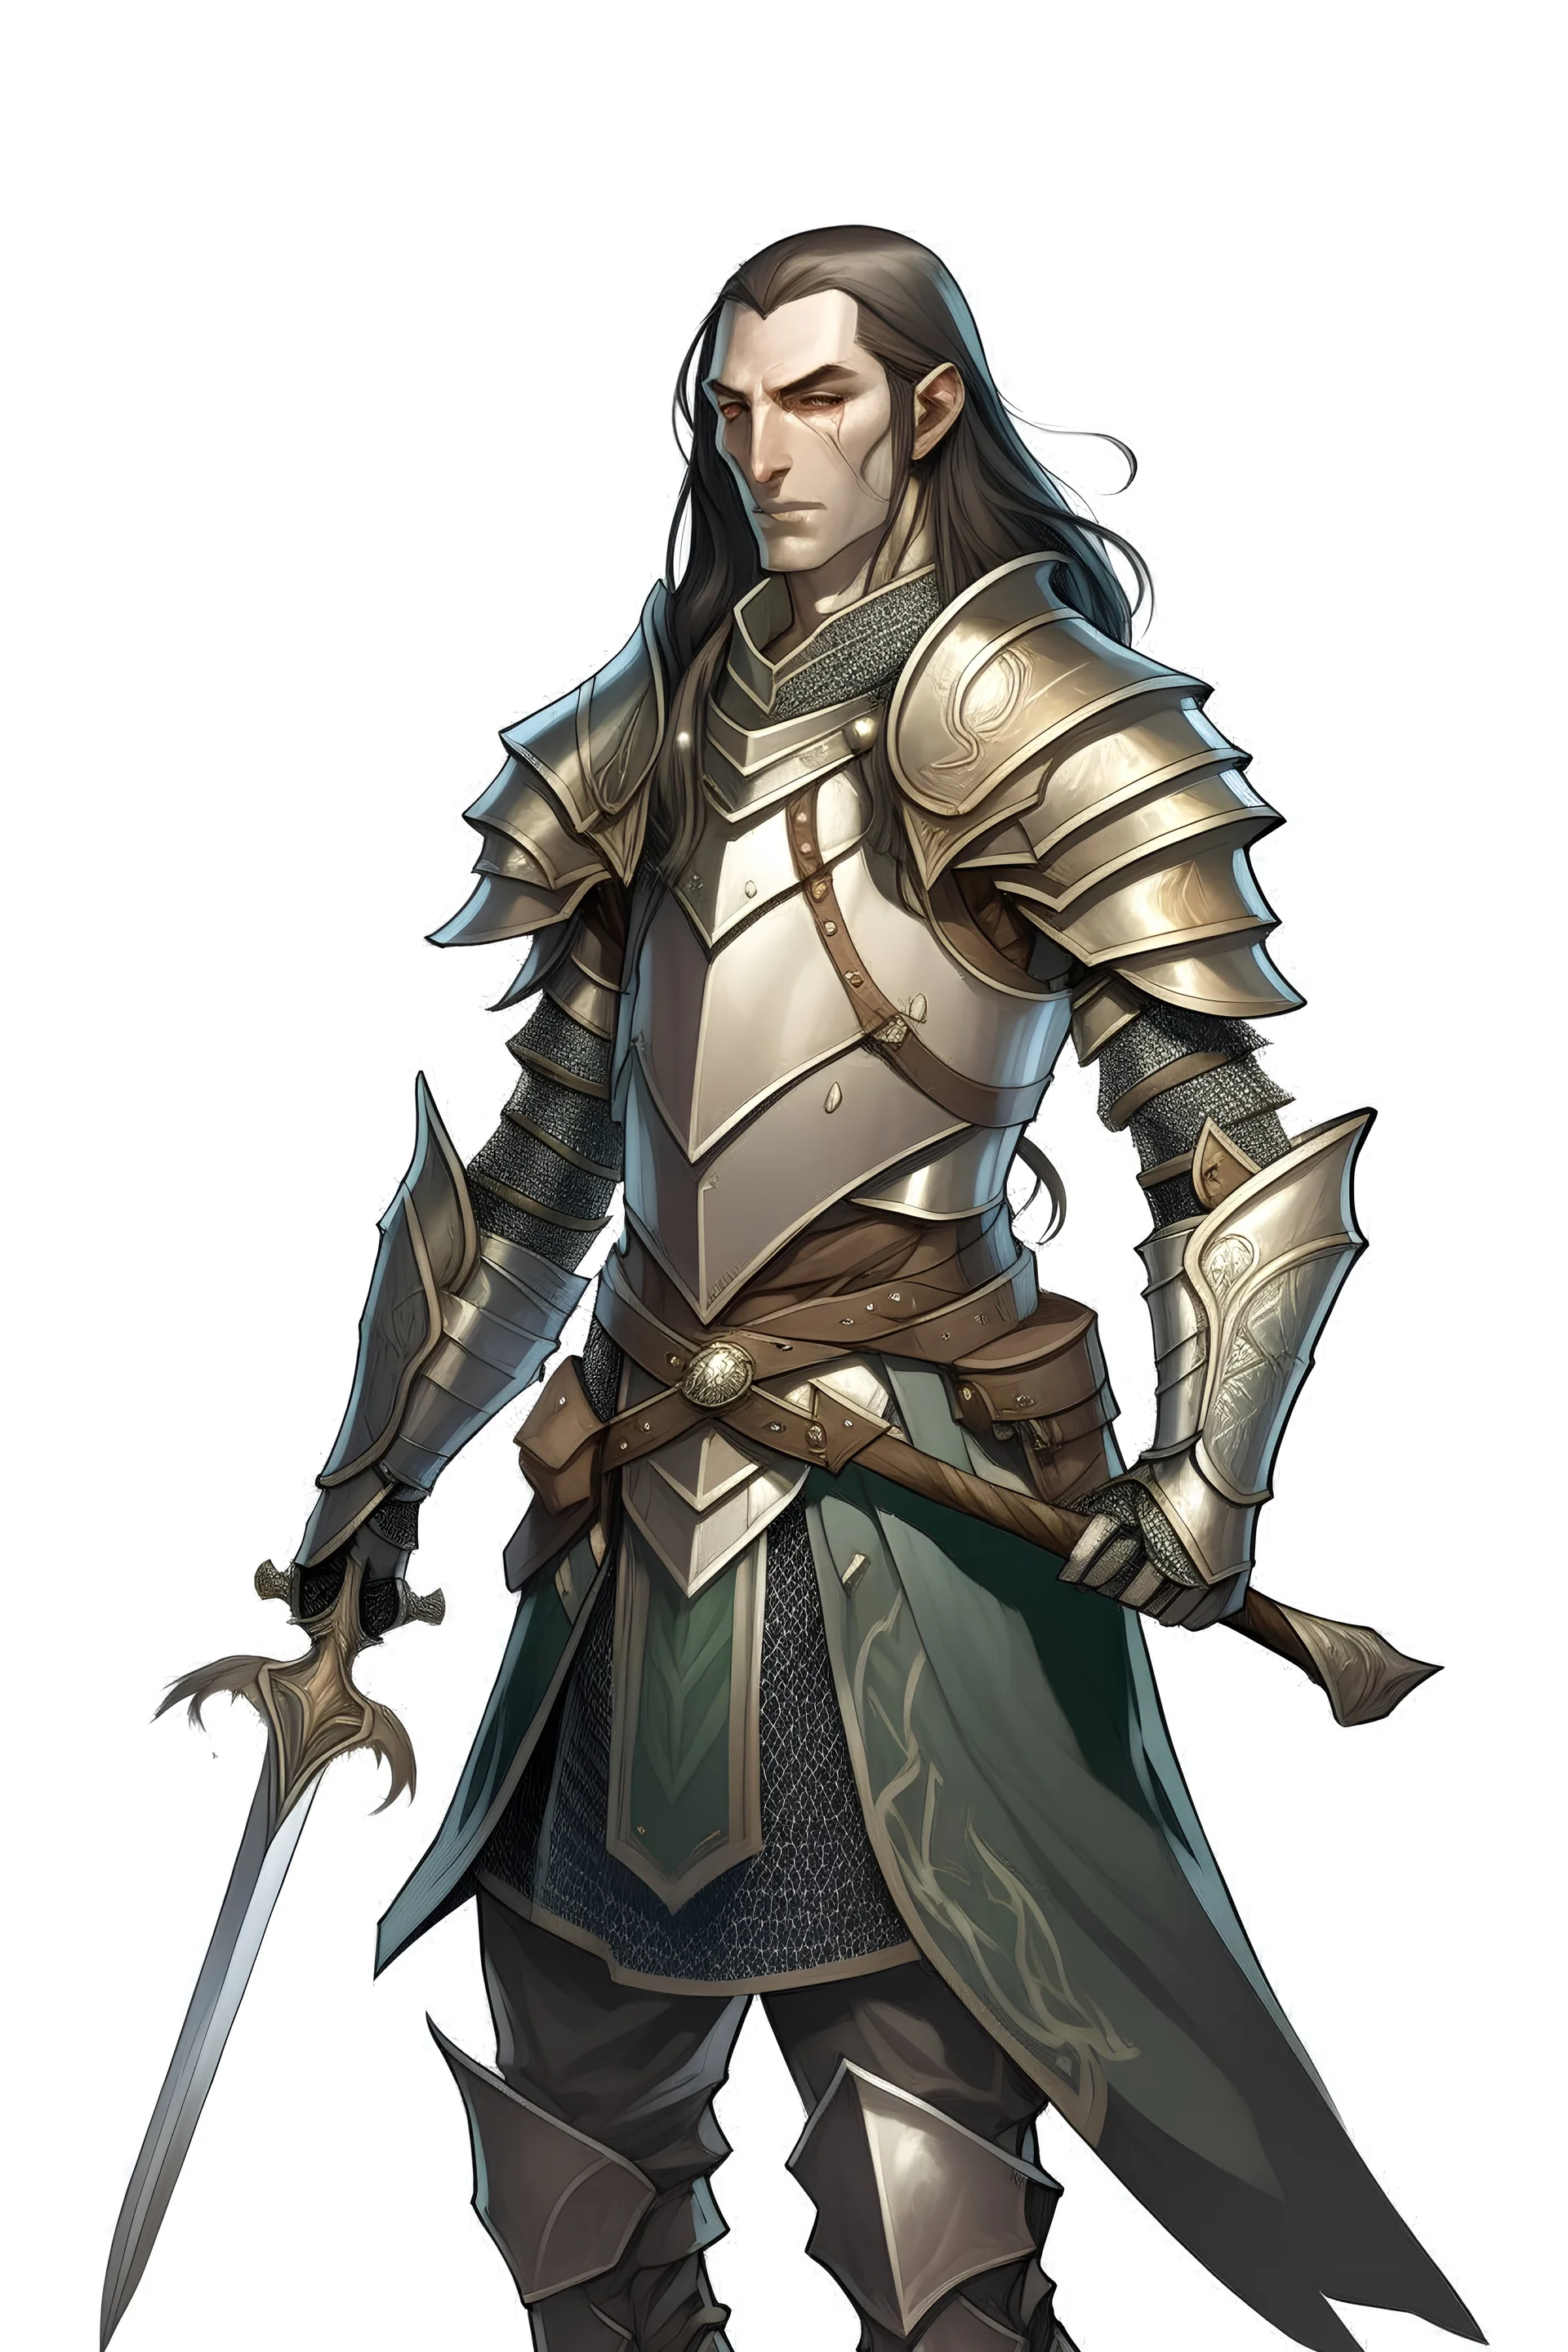 d&d high elf knight male in his twenties wearing medieval armor with hands behind her back